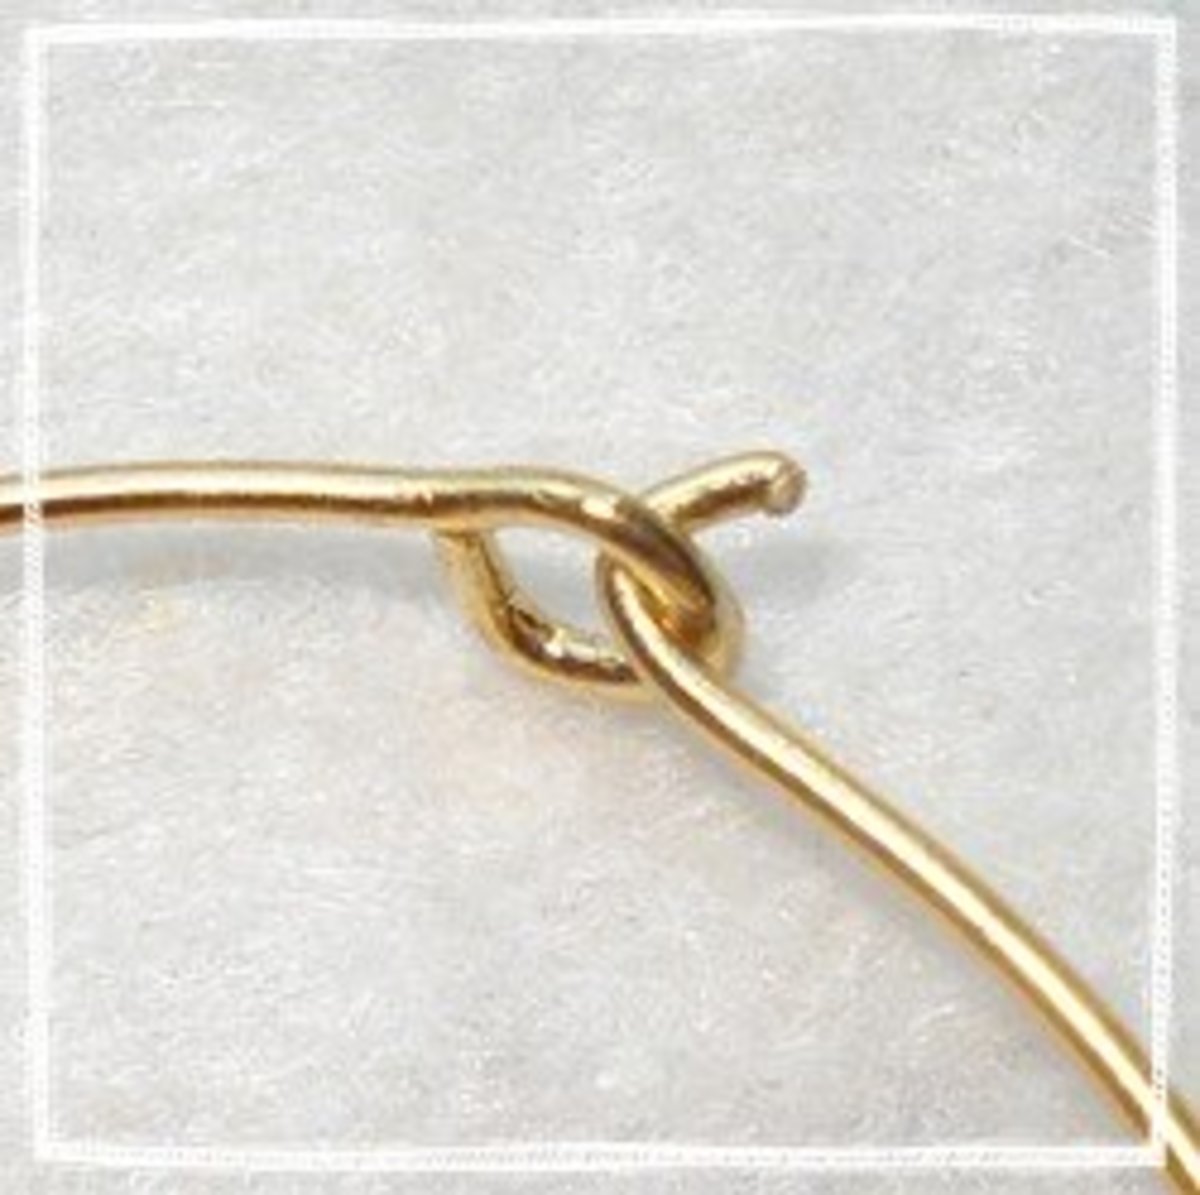 With the needle nose pliers, make a loop with one end of the wire. Bend the other side of the wire up to make a tab for your wine glass rings.